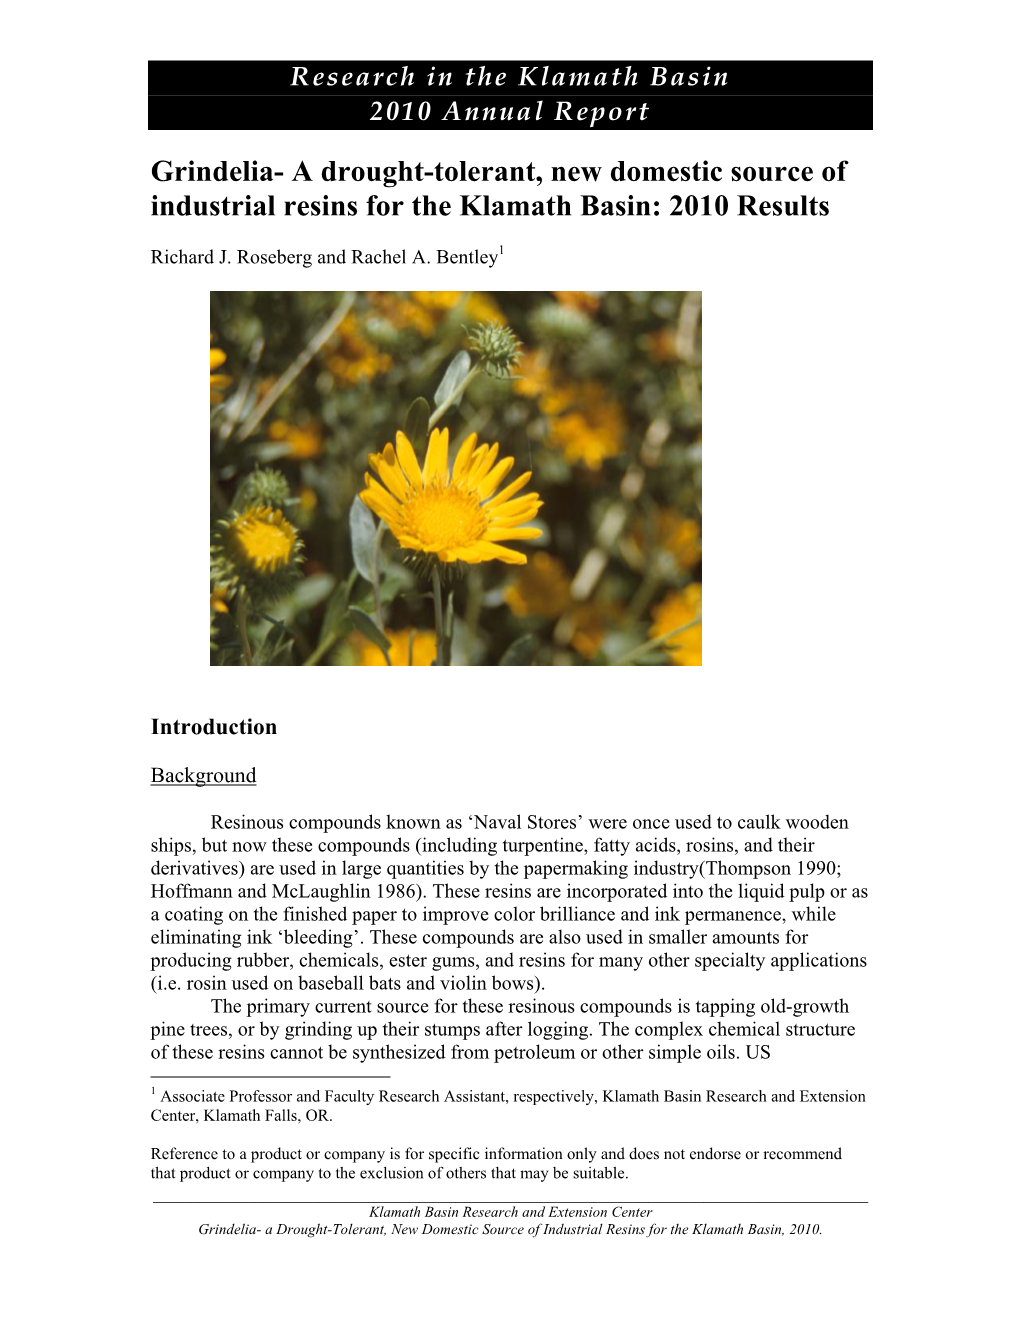 Grindelia- a Drought-Tolerant, New Domestic Source of Industrial Resins for the Klamath Basin: 2010 Results